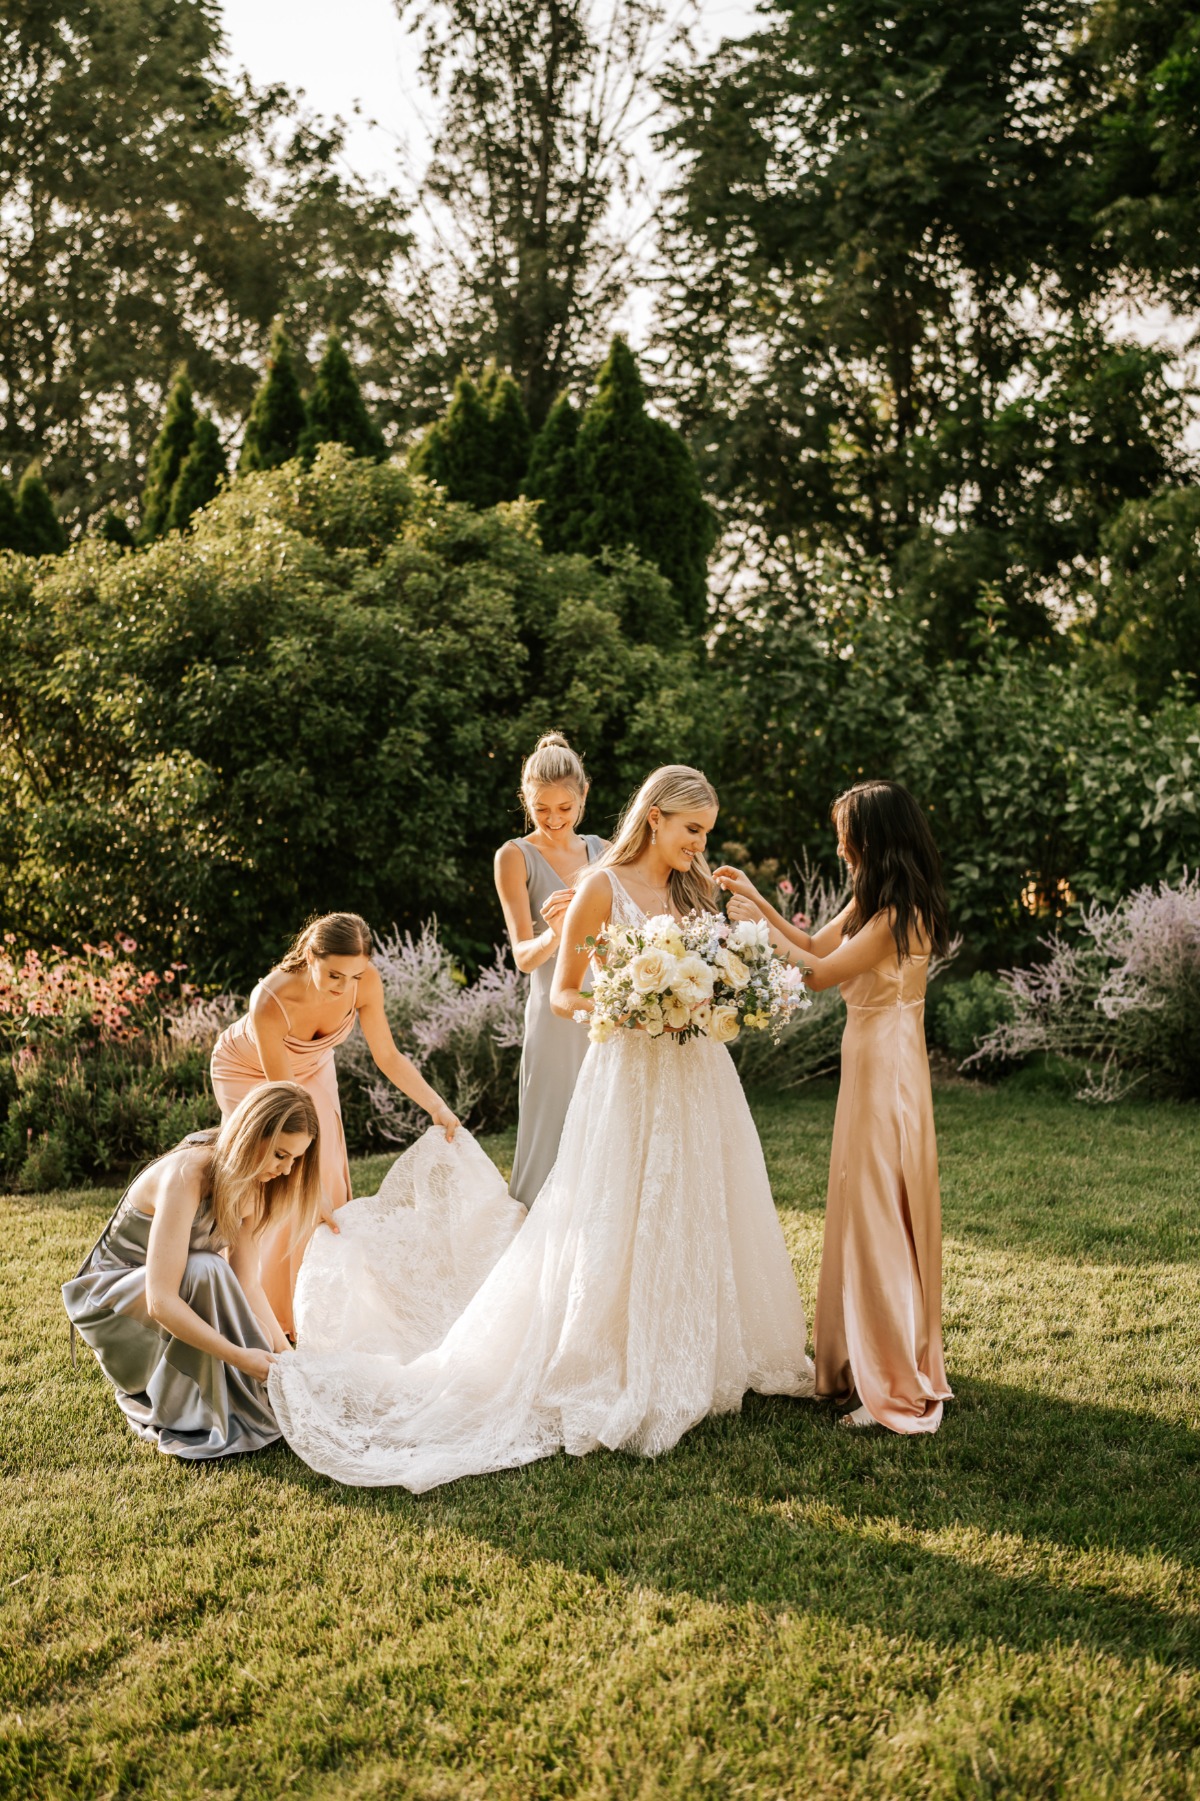 Bridemaids helping bride into lace gown